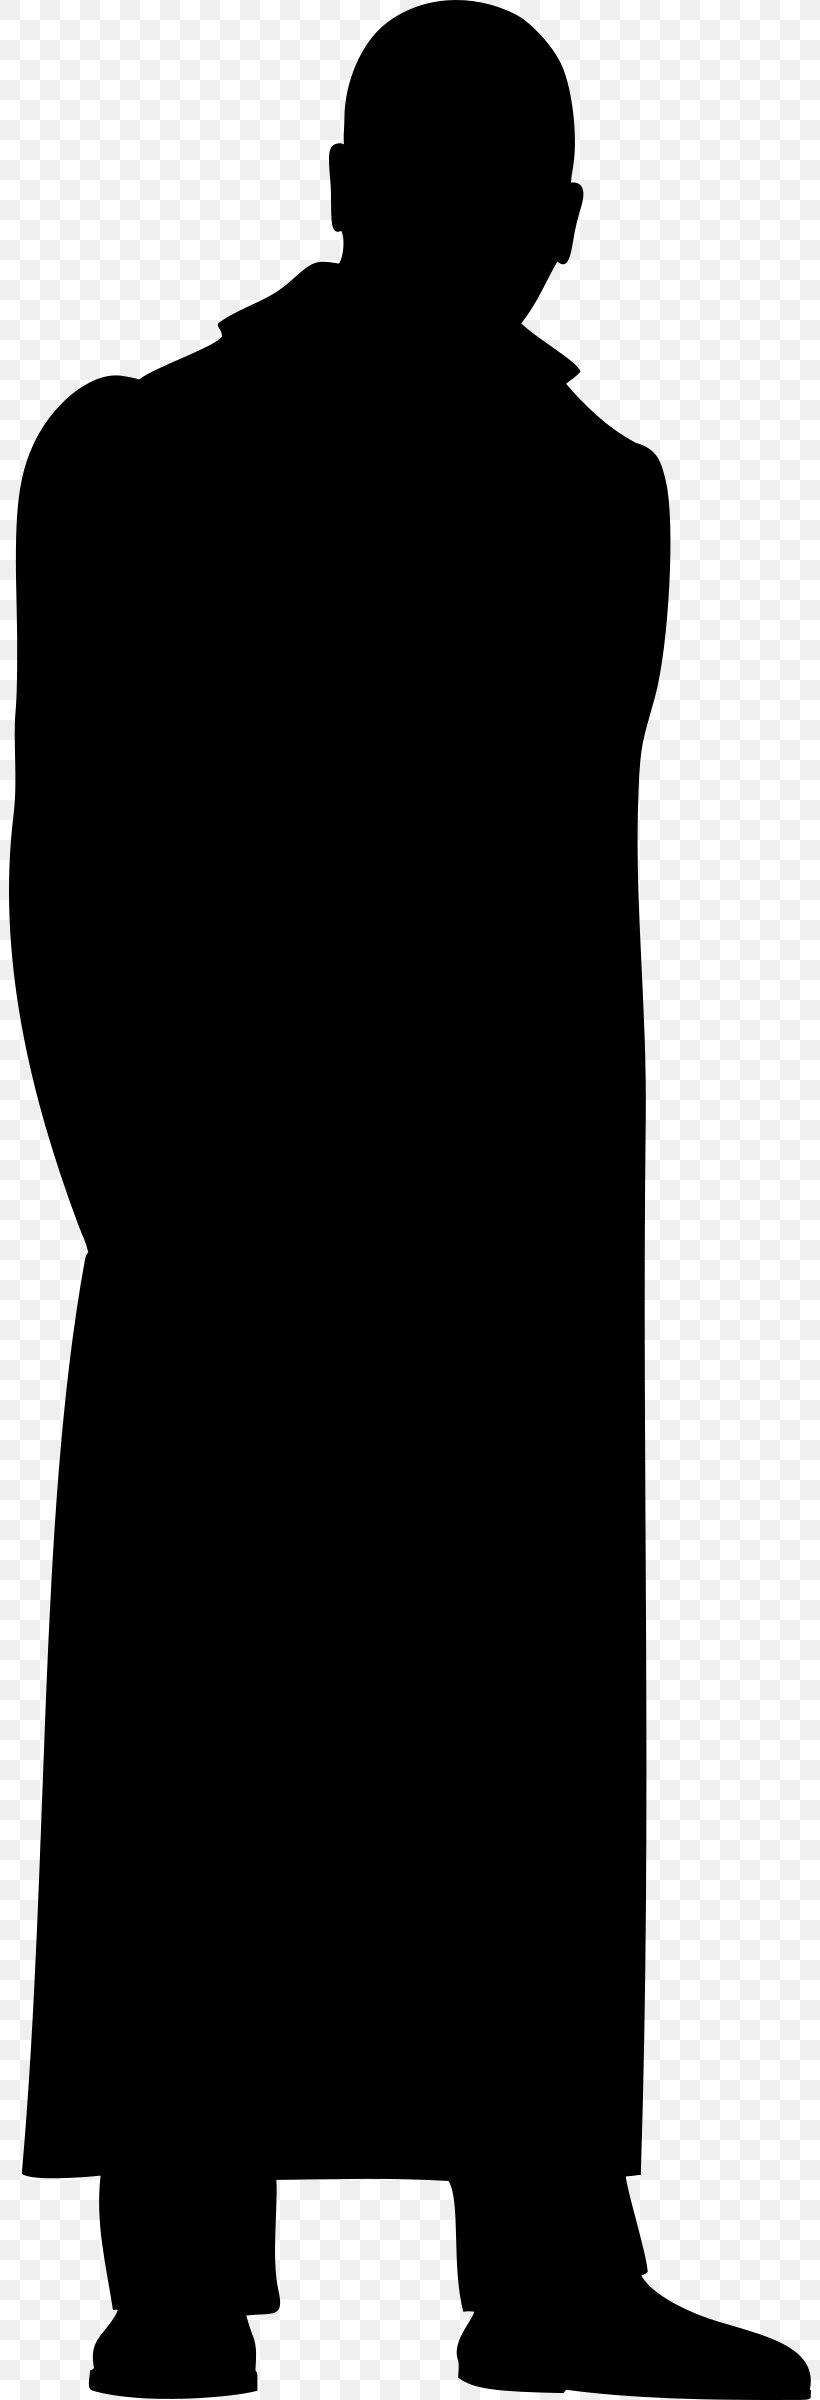 Silhouette Coat Clip Art, PNG, 802x2400px, Silhouette, Black, Black And White, Coat, Jacket Download Free